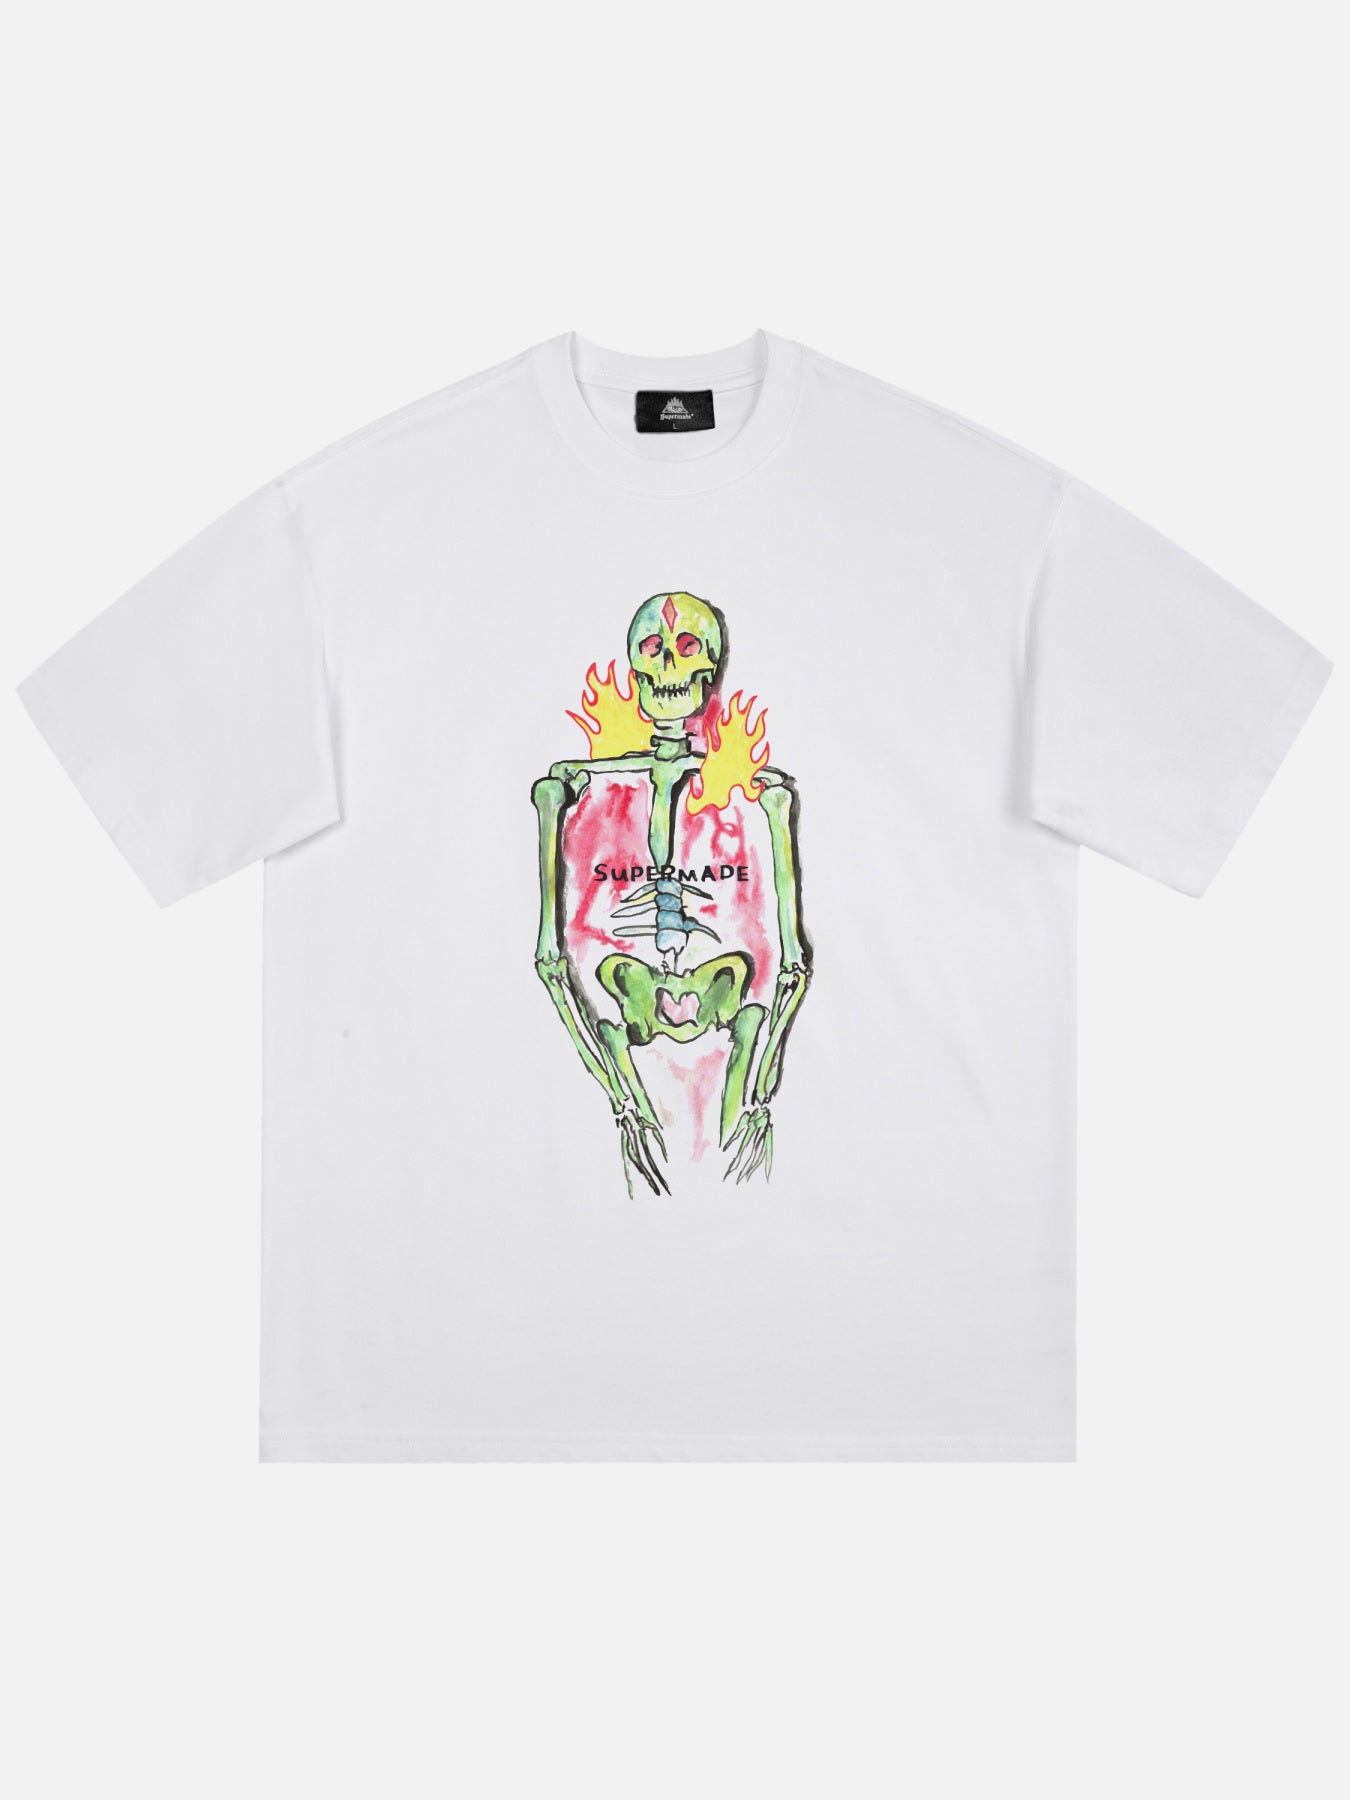 Thesupermade Hand-painted Skull Print T-shirt